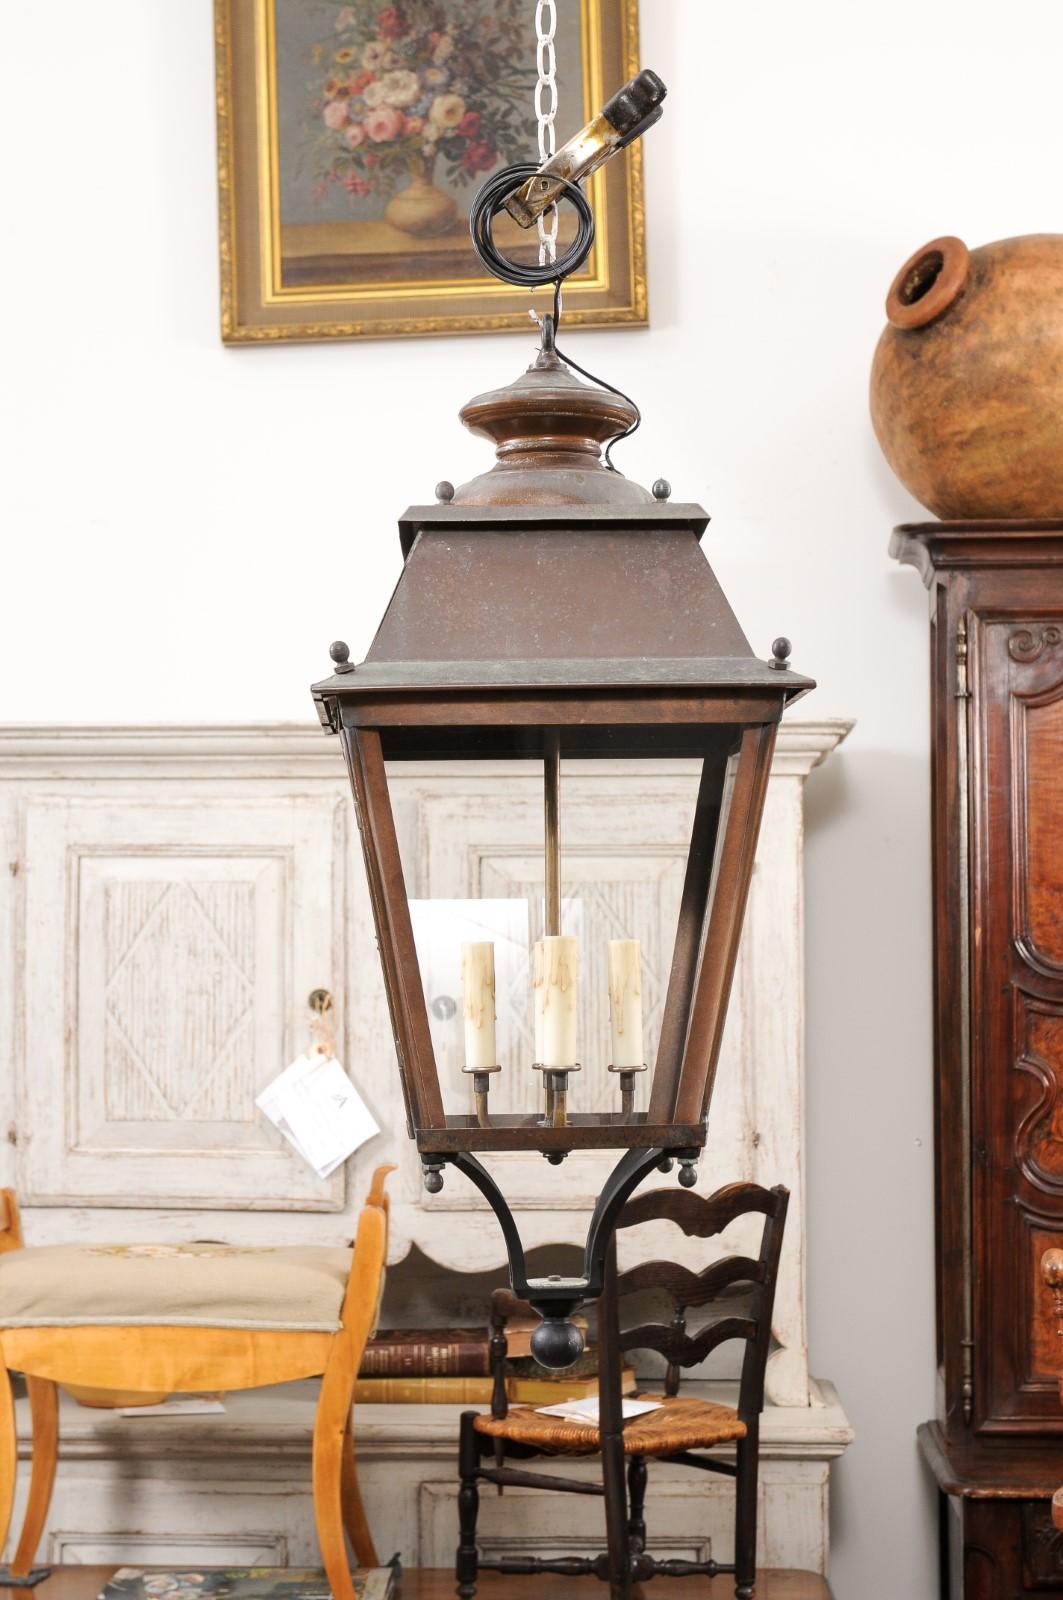 Two French copper lanterns from the 20th century, with four lights, glass panels, lower finial and rustic character. They have been professionally rewired for the USA. Discover the timeless elegance and warm glow of these two French copper lanterns